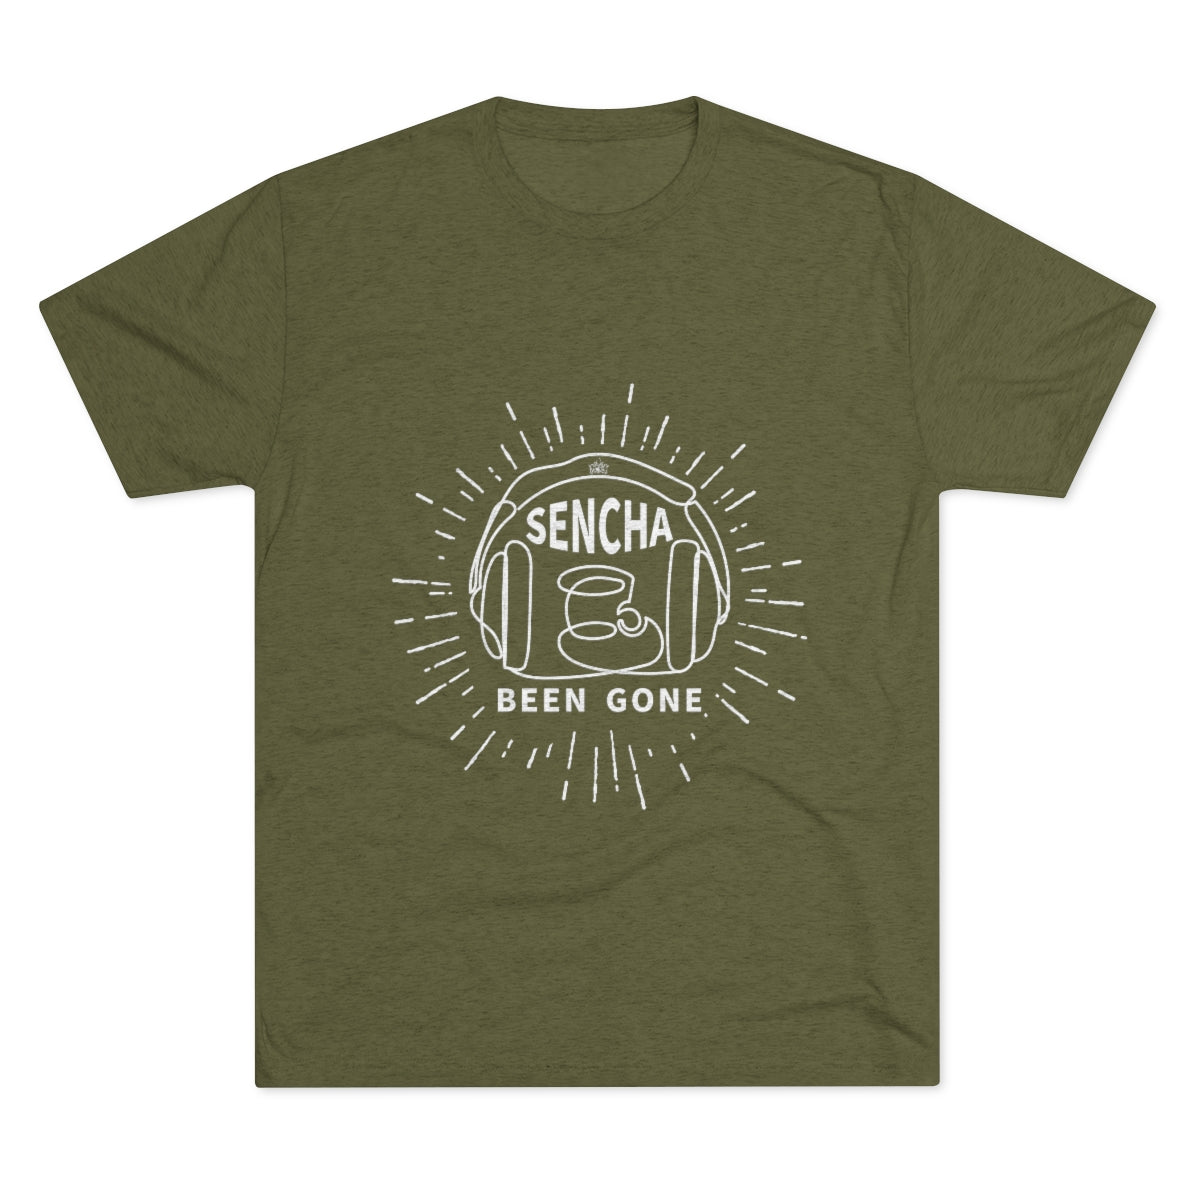 Sencha Been Gone Graphic Tee - Tri-Blend Military Green S - Harney & Sons Fine Teas